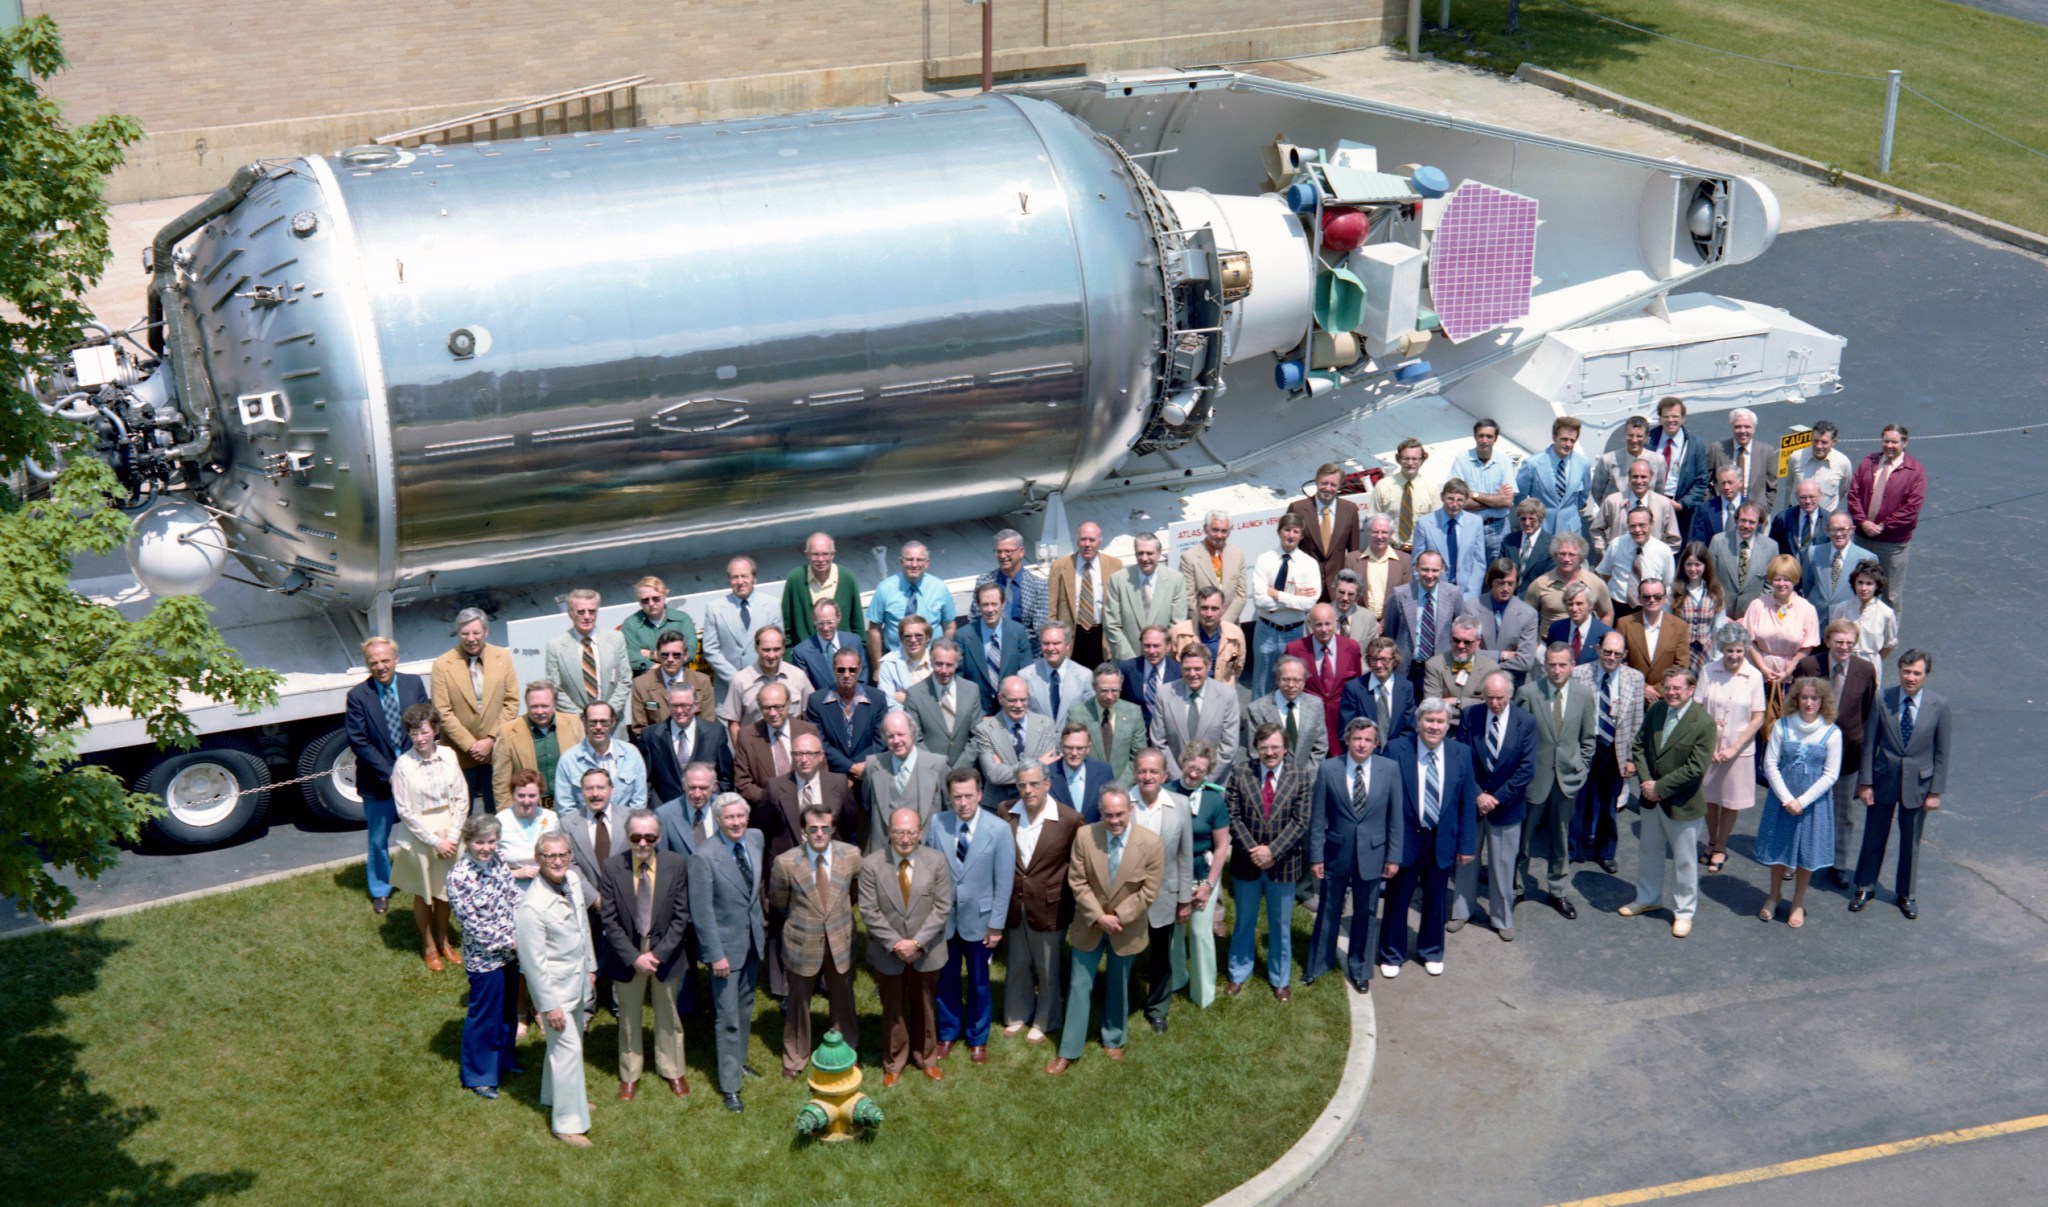 Group of people standing in front of horizontally-mounted rocket.